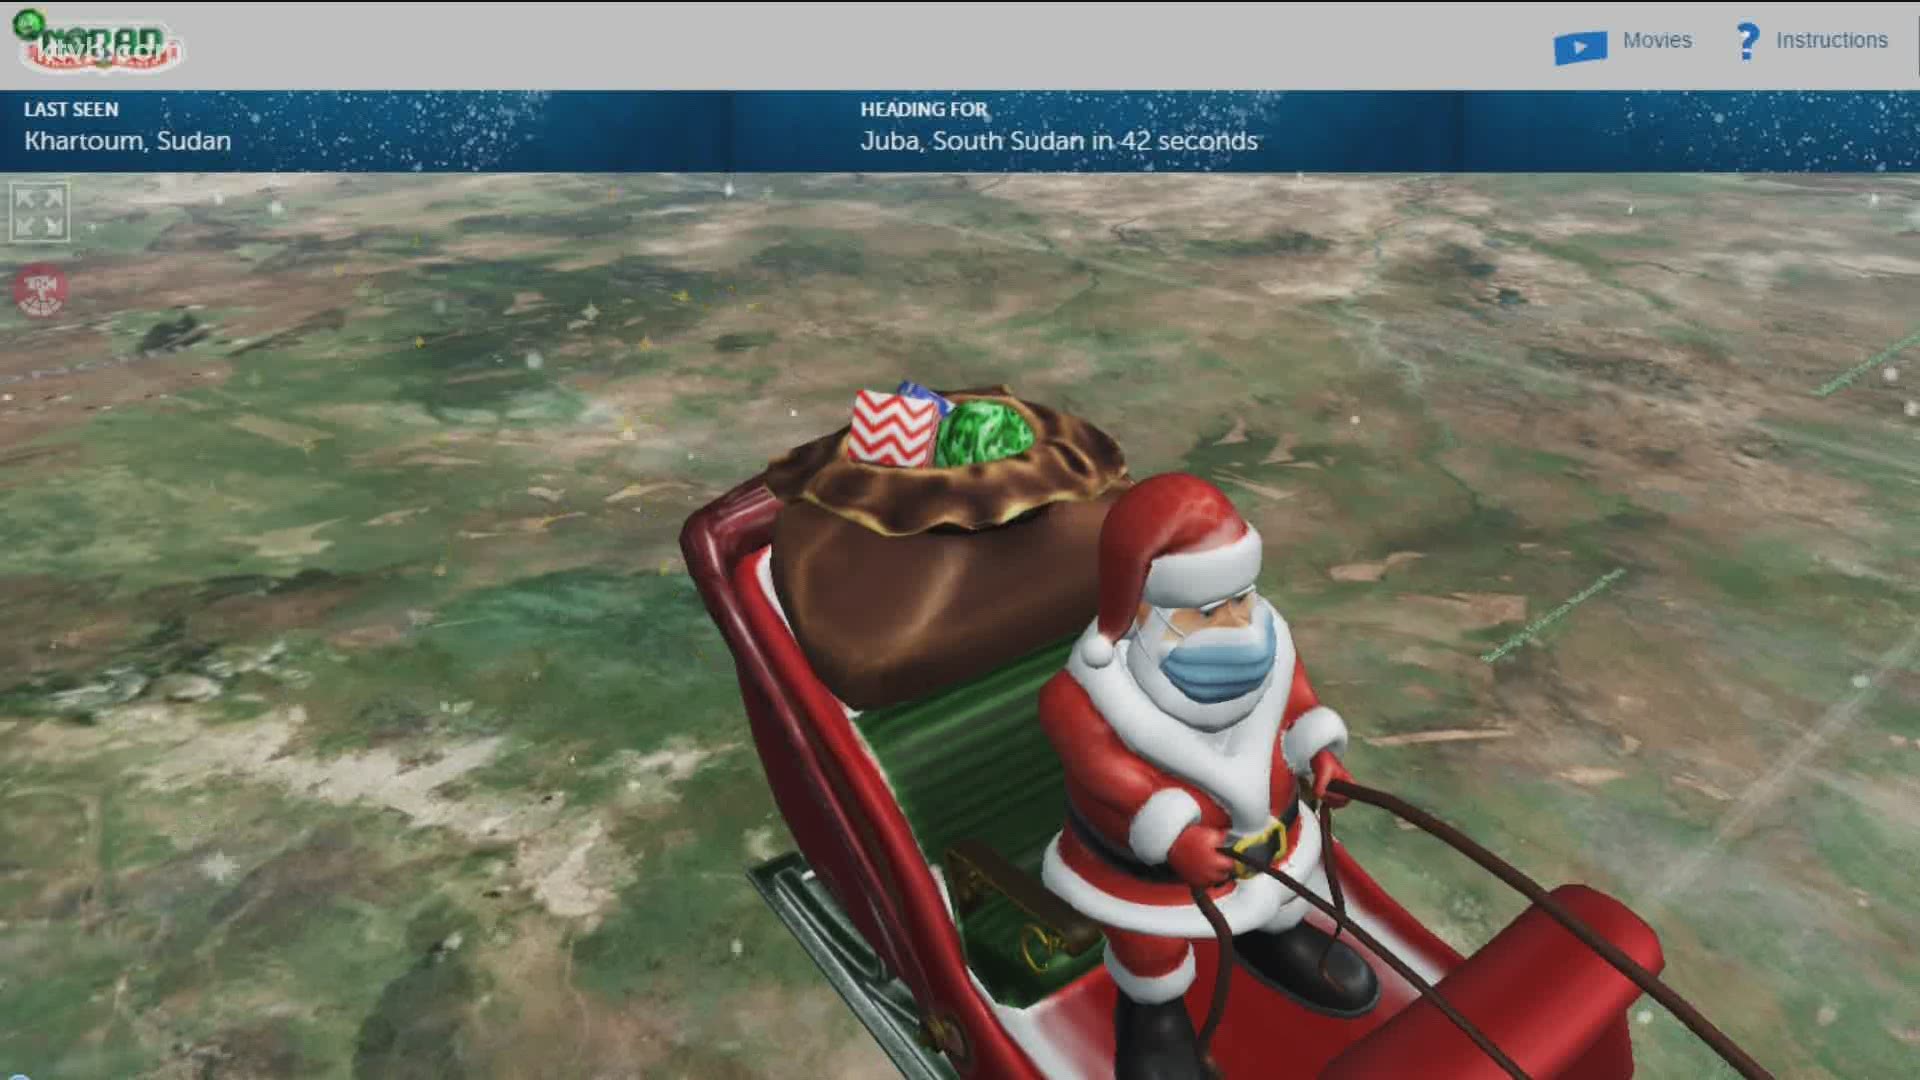 Boise-based Cradlepoint helps NORAD each year with its Santa tracker program.